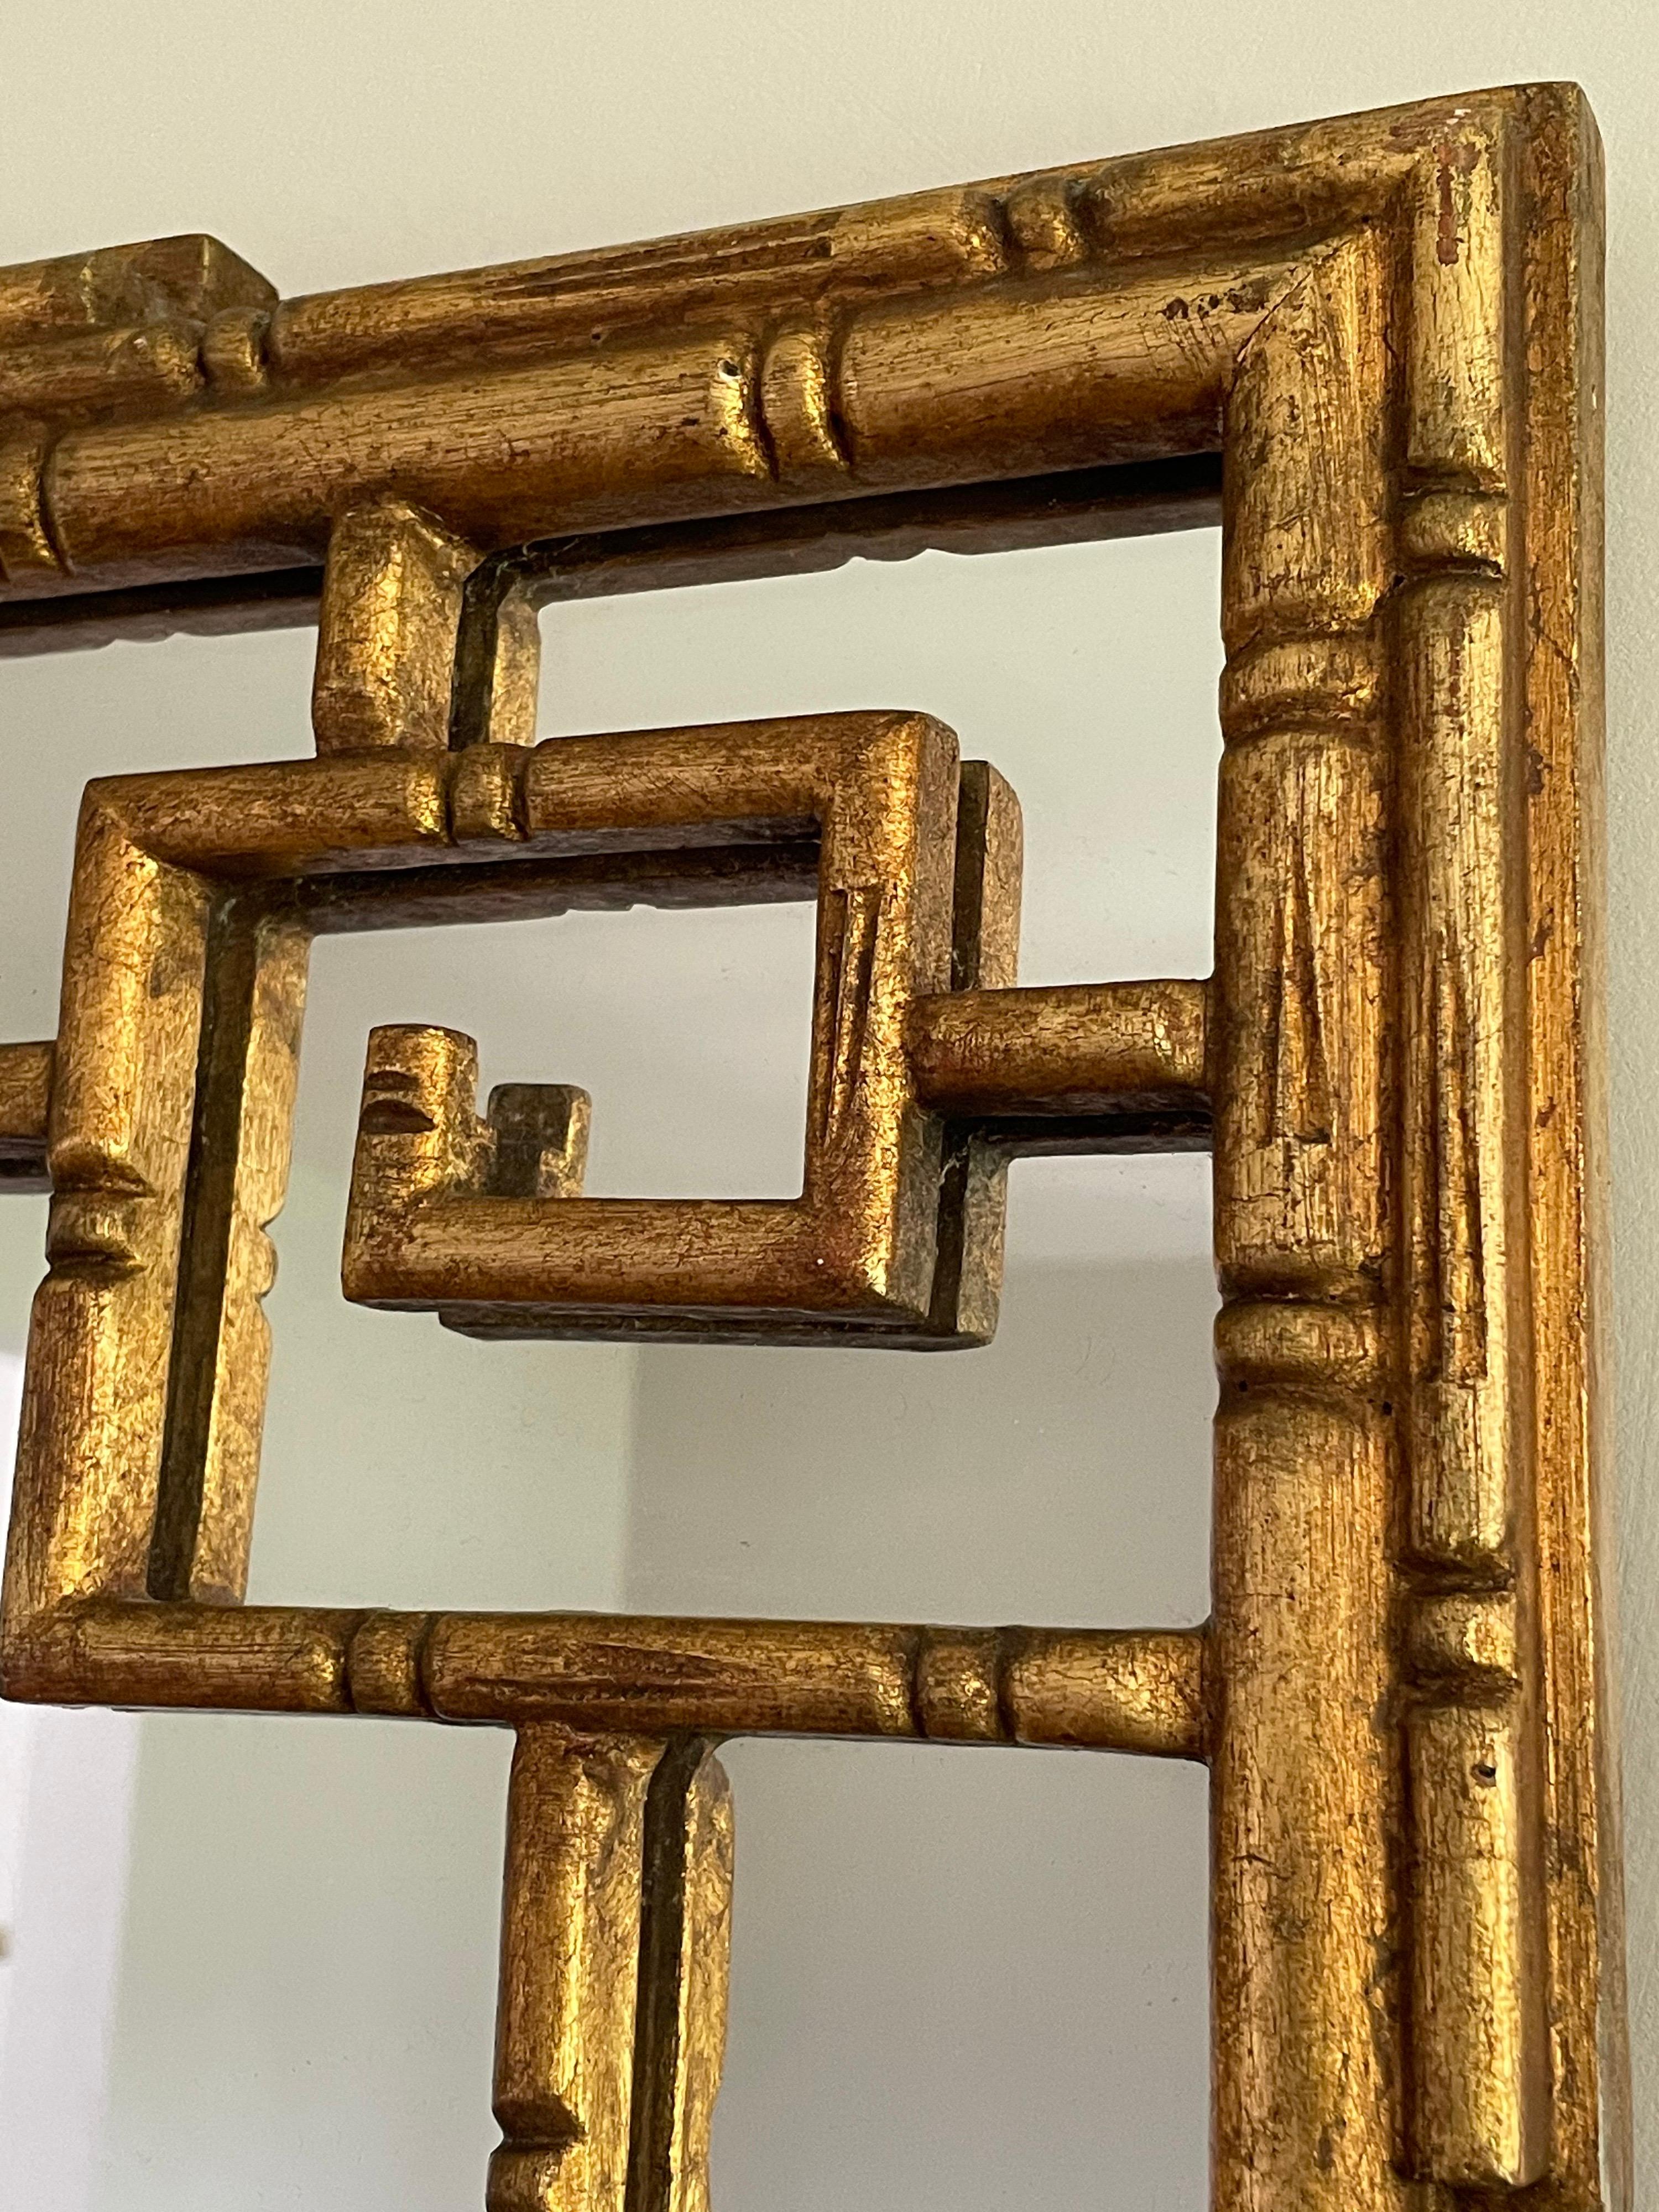 Unusual faux bamboo vintage mirror in a Greek key motif. Very good condition, some loss to paper backing as seen. Heavy and well constructed. 

Measures: 34